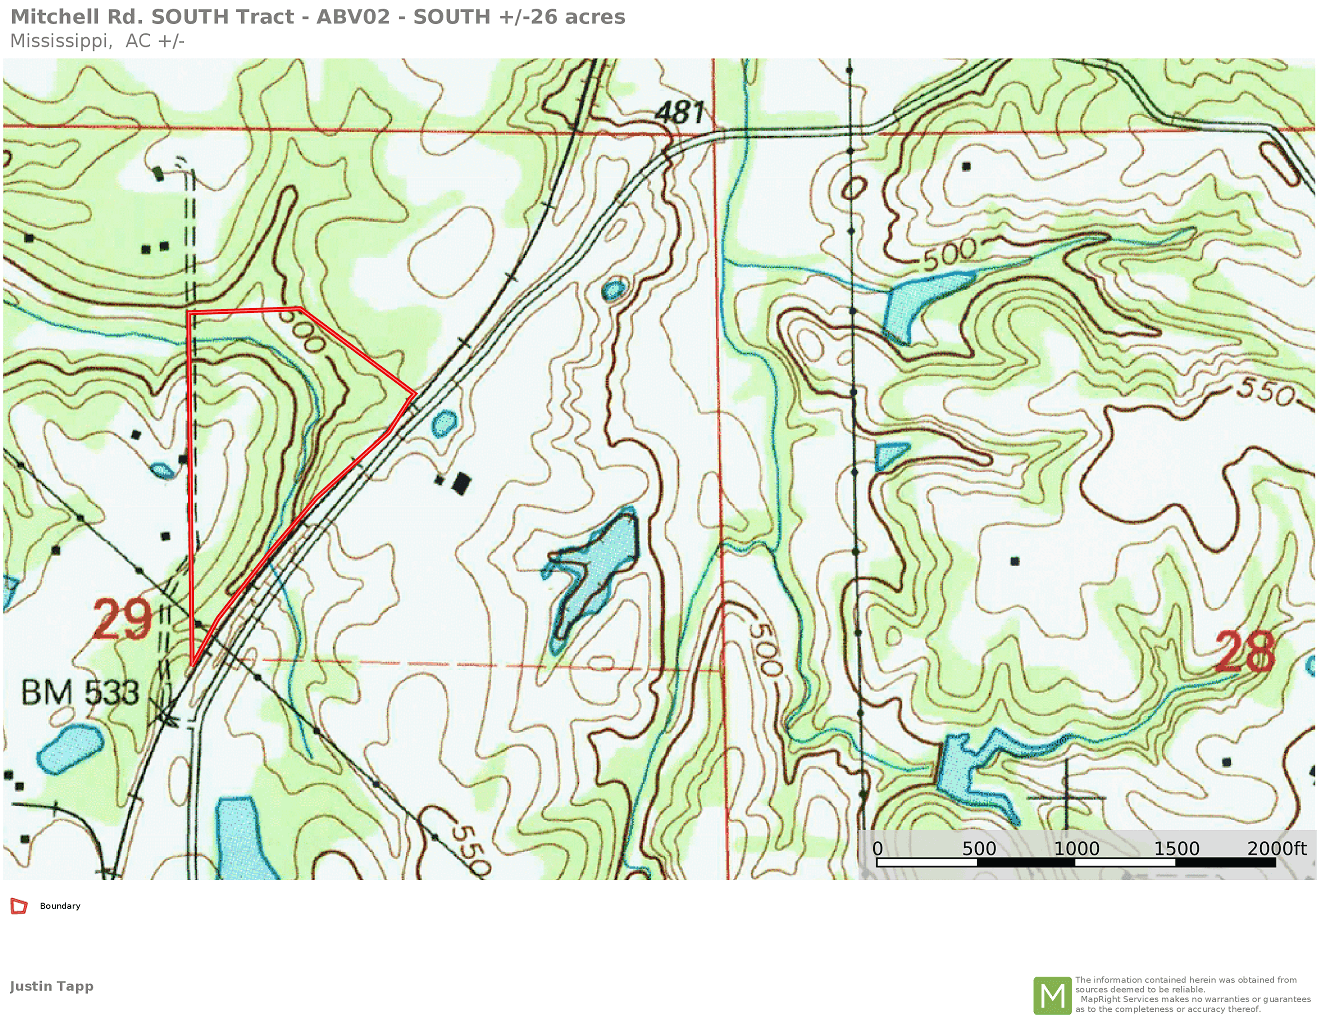 15 Topo Map ABV02 SOUTH 26 acres.png